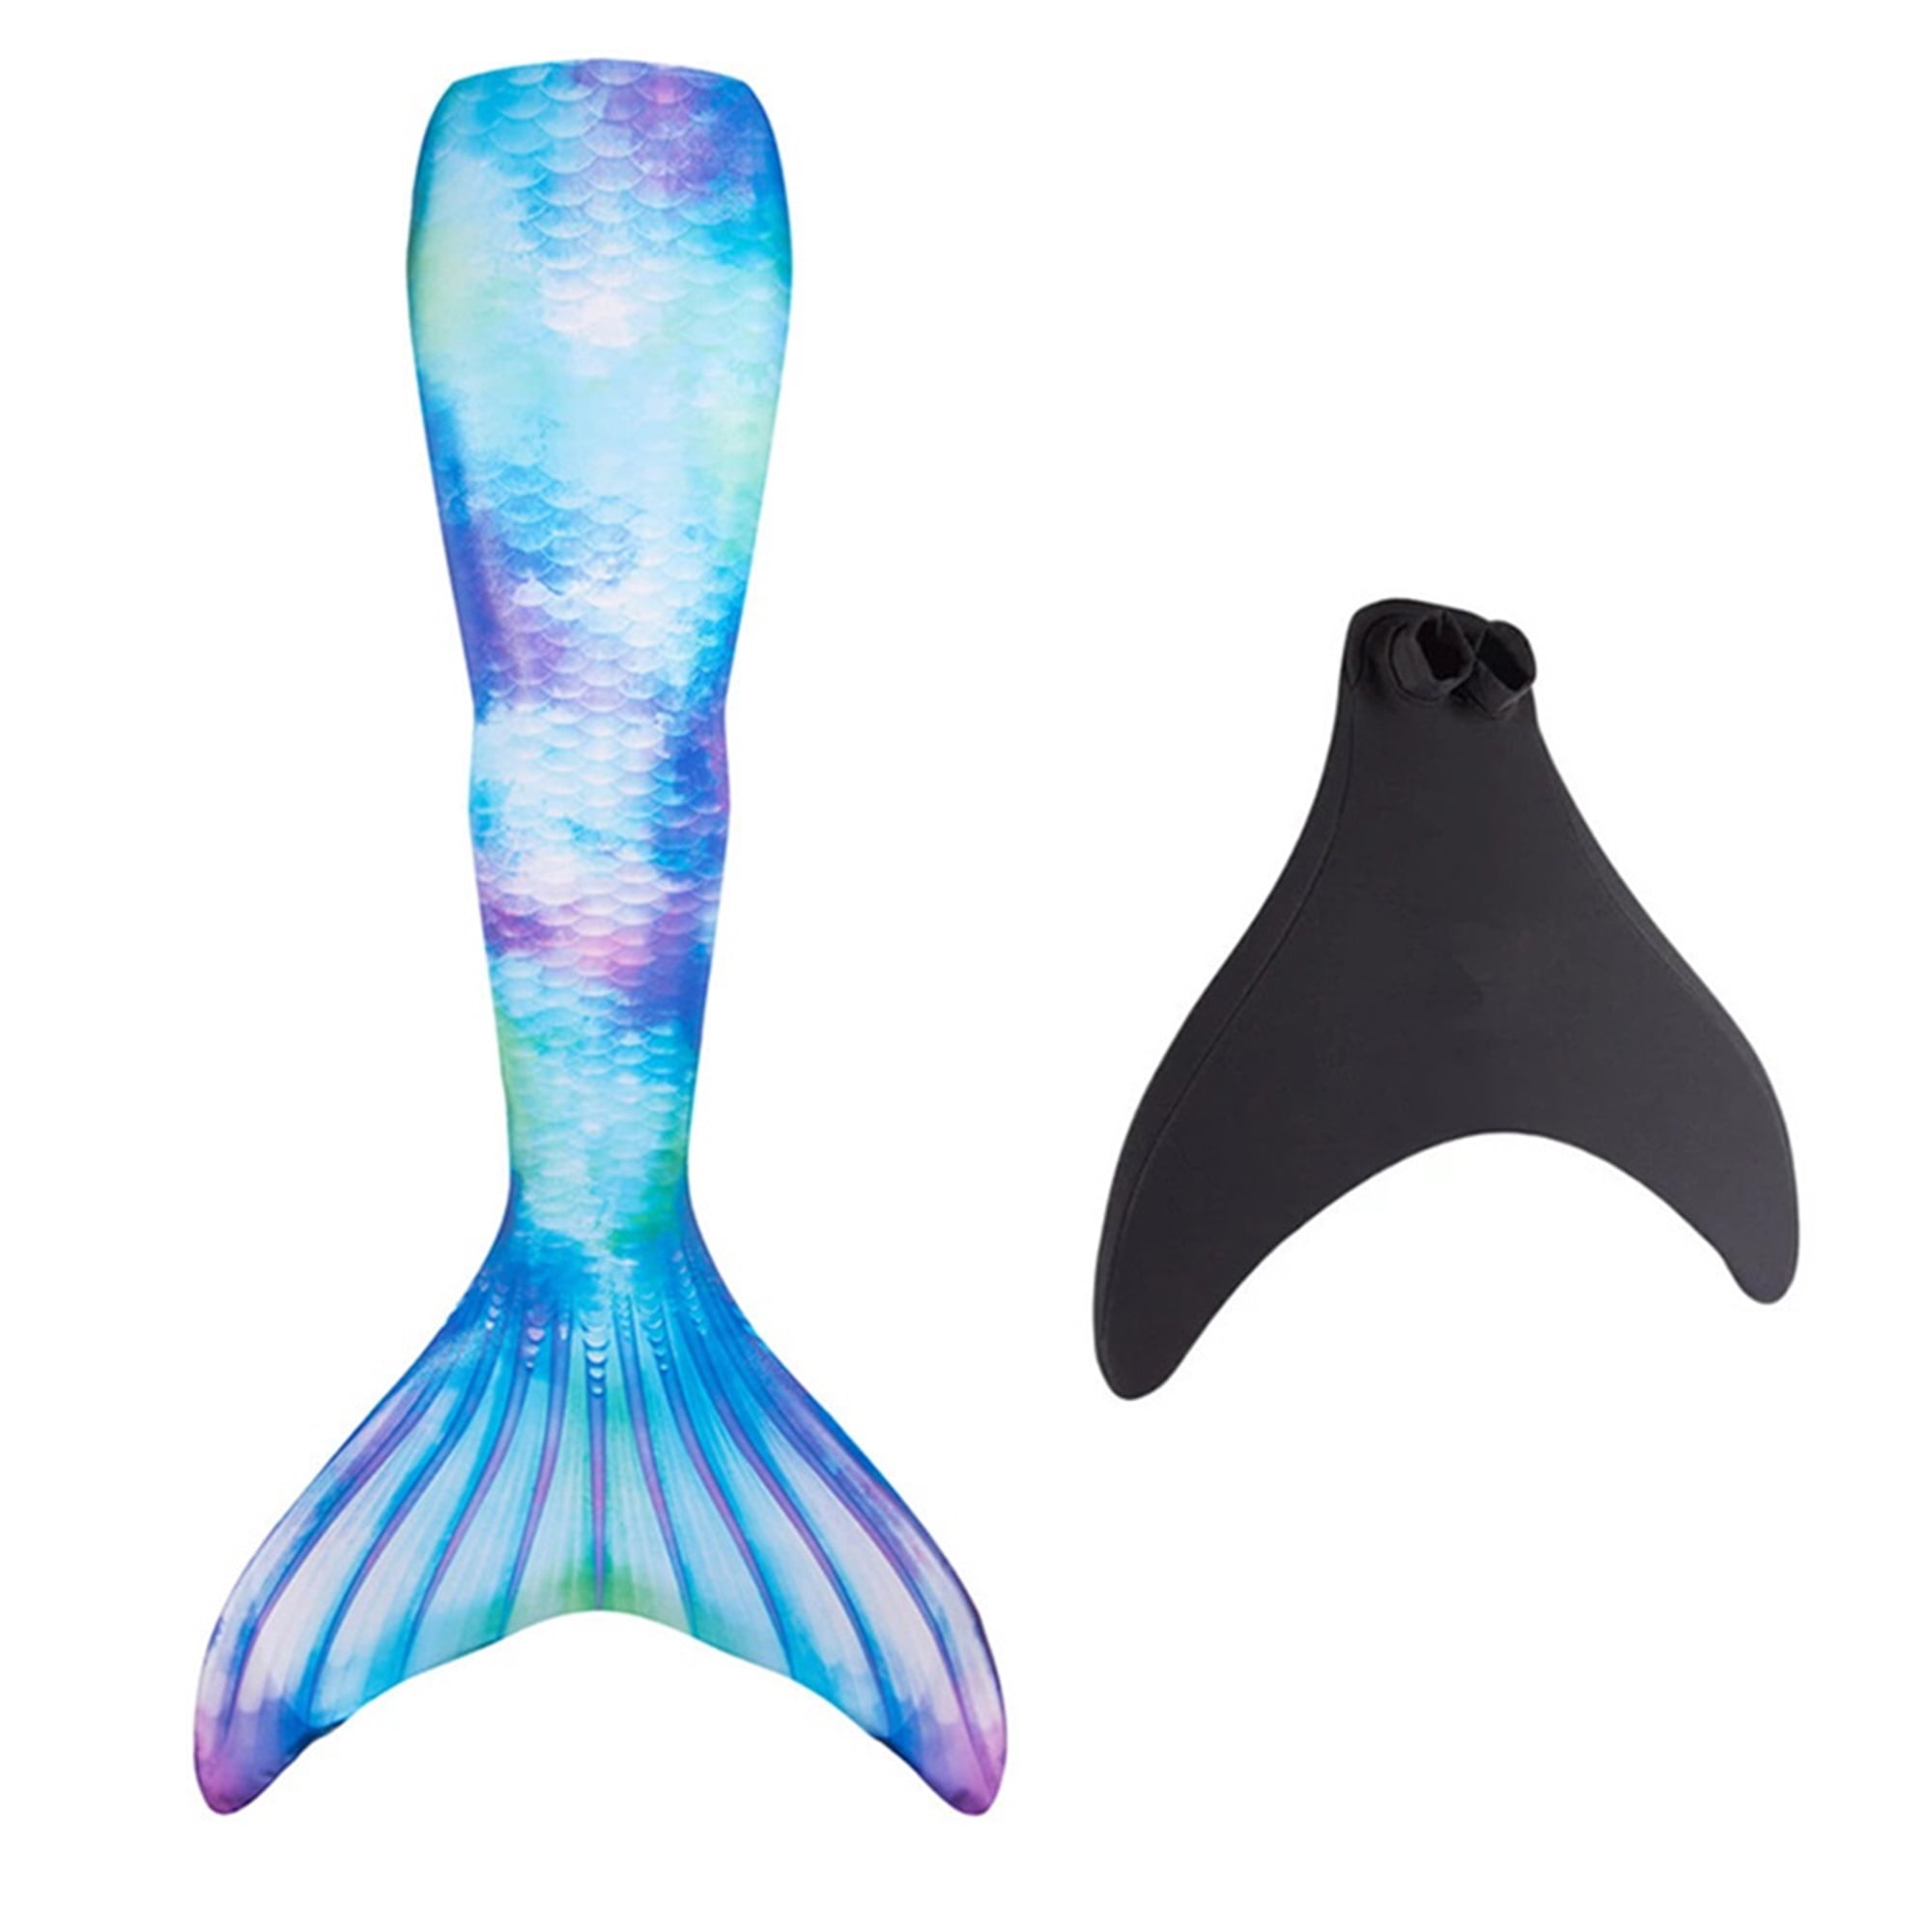 Mermaid Tail and Monofin for Swimming with MER-Shield Tip Protection Adult Sizes 